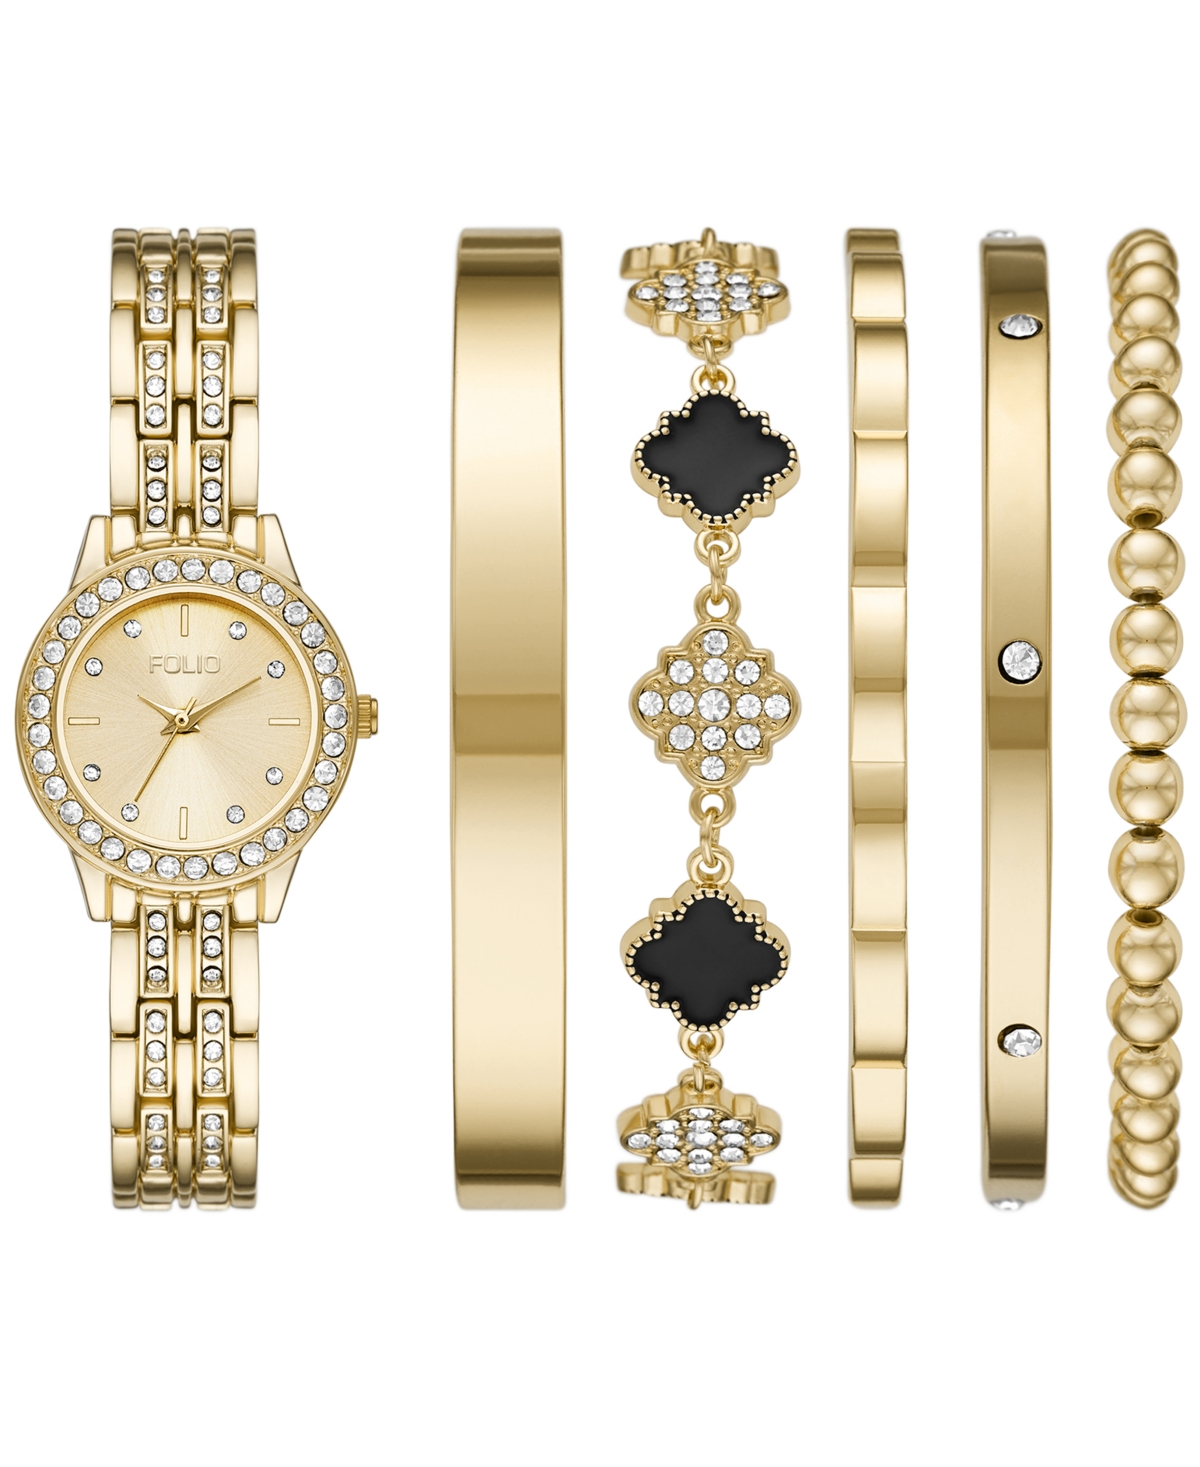 Folio Women's Three Hand Gold-Tone 27mm Watch and Bracelet Gift Set, 6 Pieces